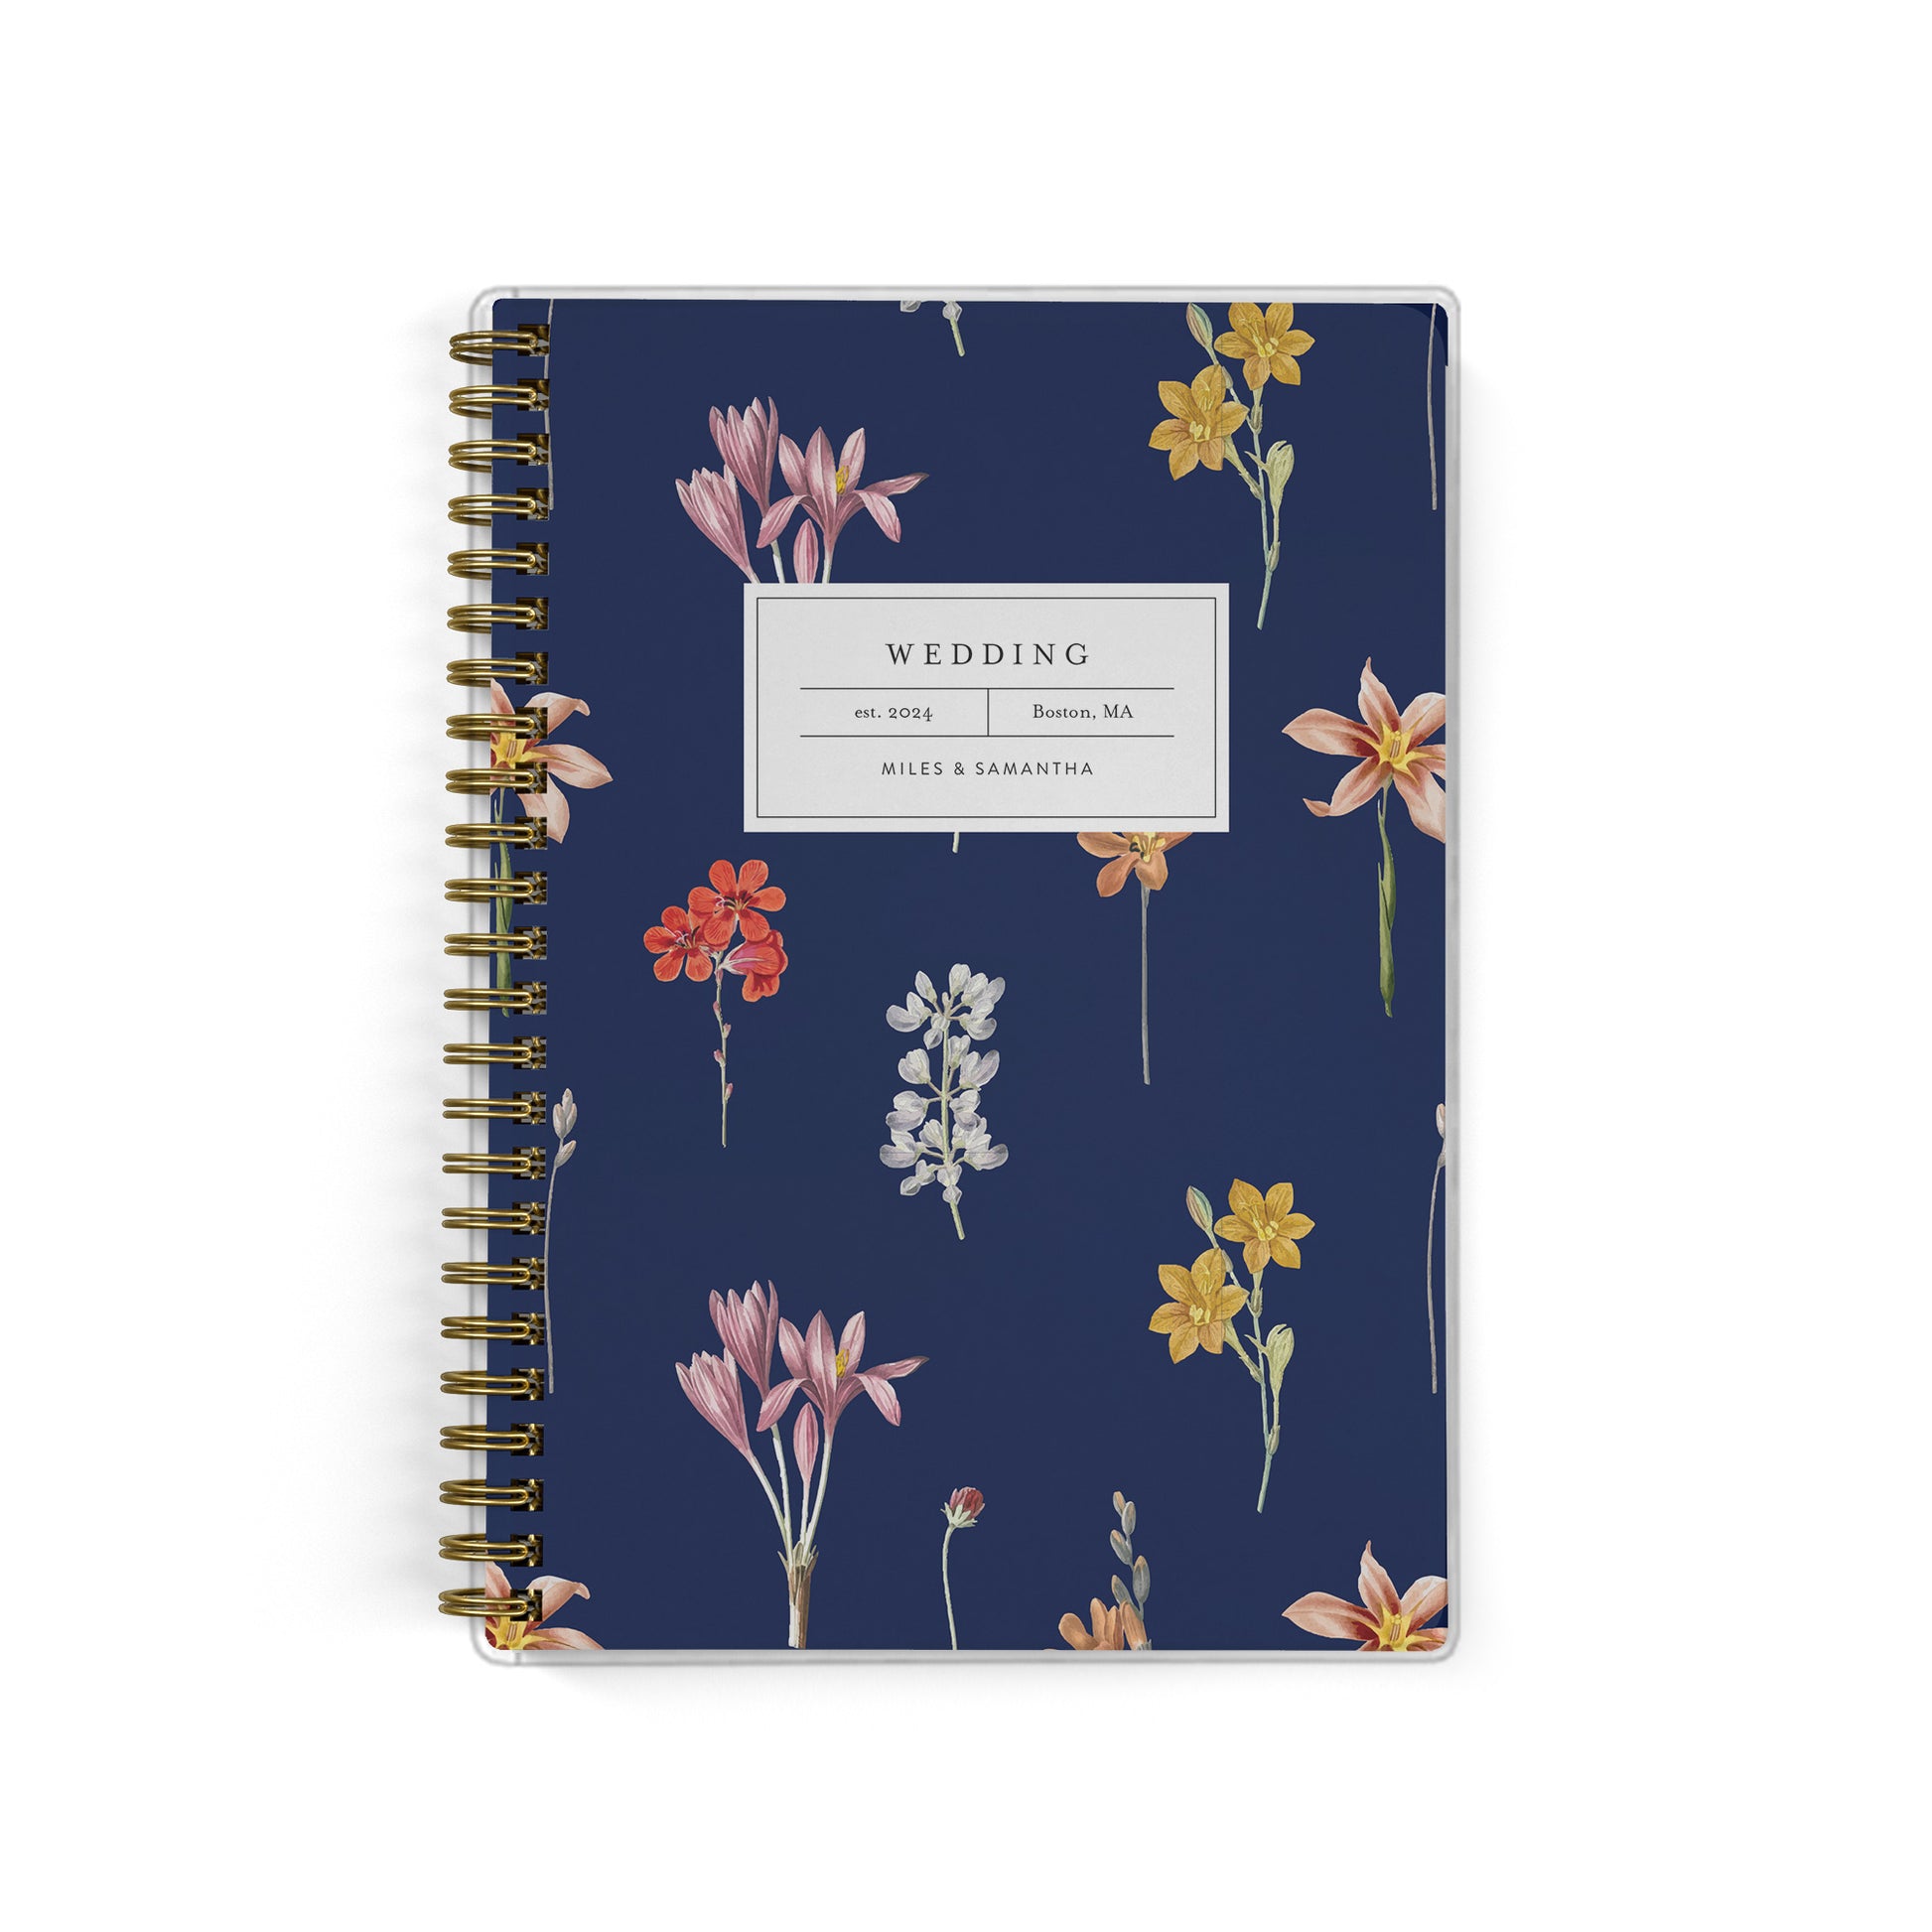 Our exclusive mini wedding planners are perfect for planning small weddings and elopements, shown in a dark floral botanical print